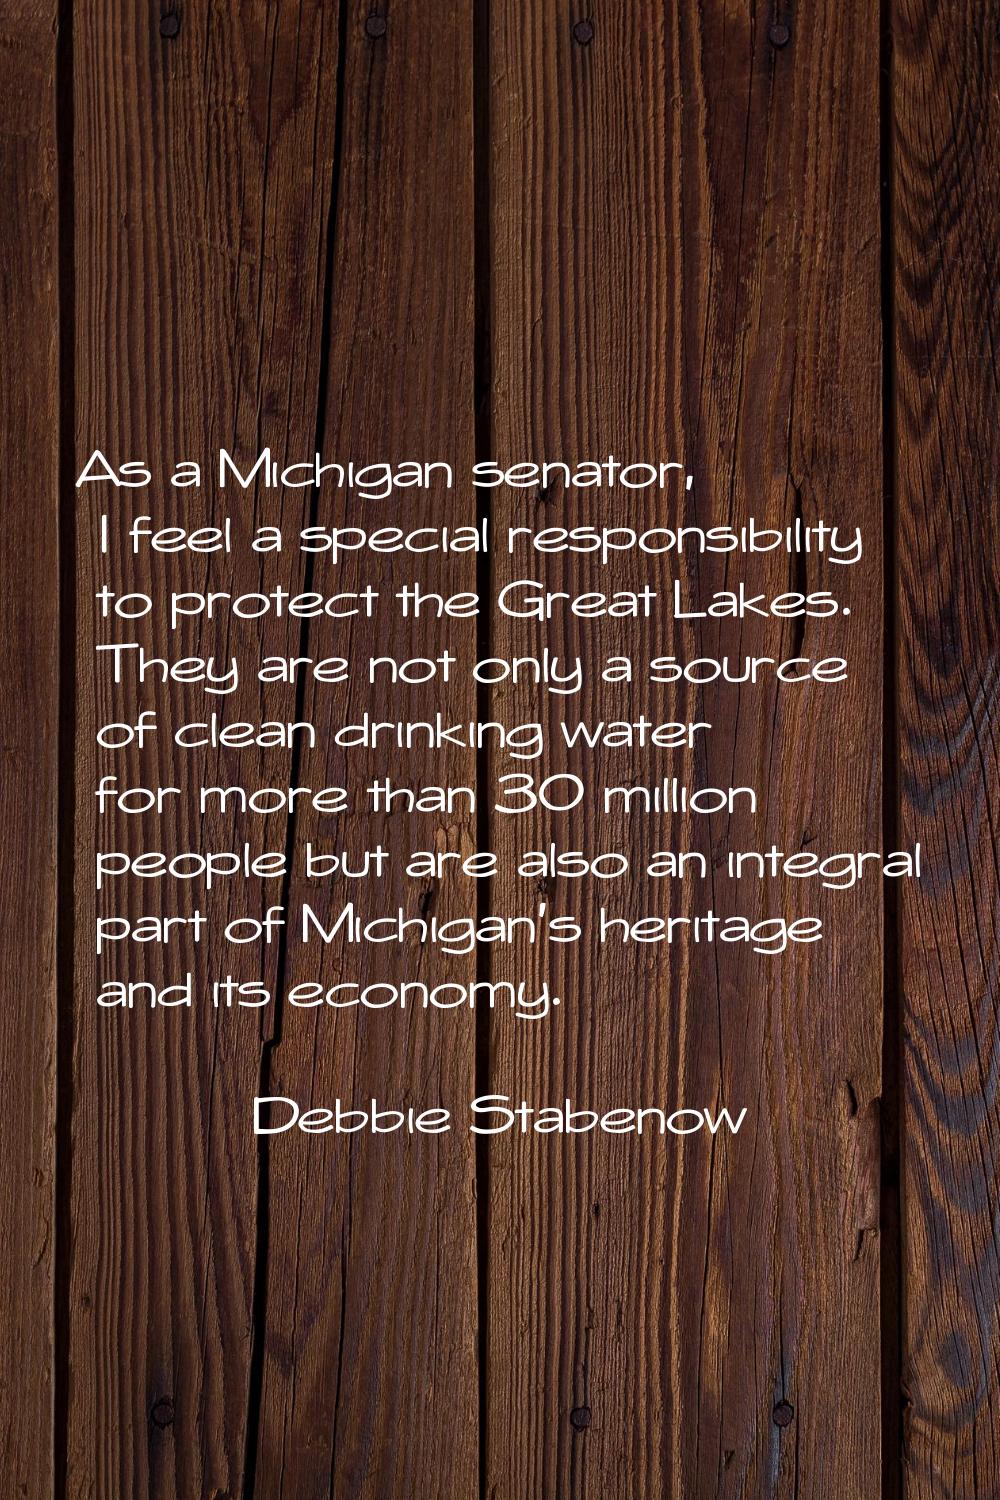 As a Michigan senator, I feel a special responsibility to protect the Great Lakes. They are not onl